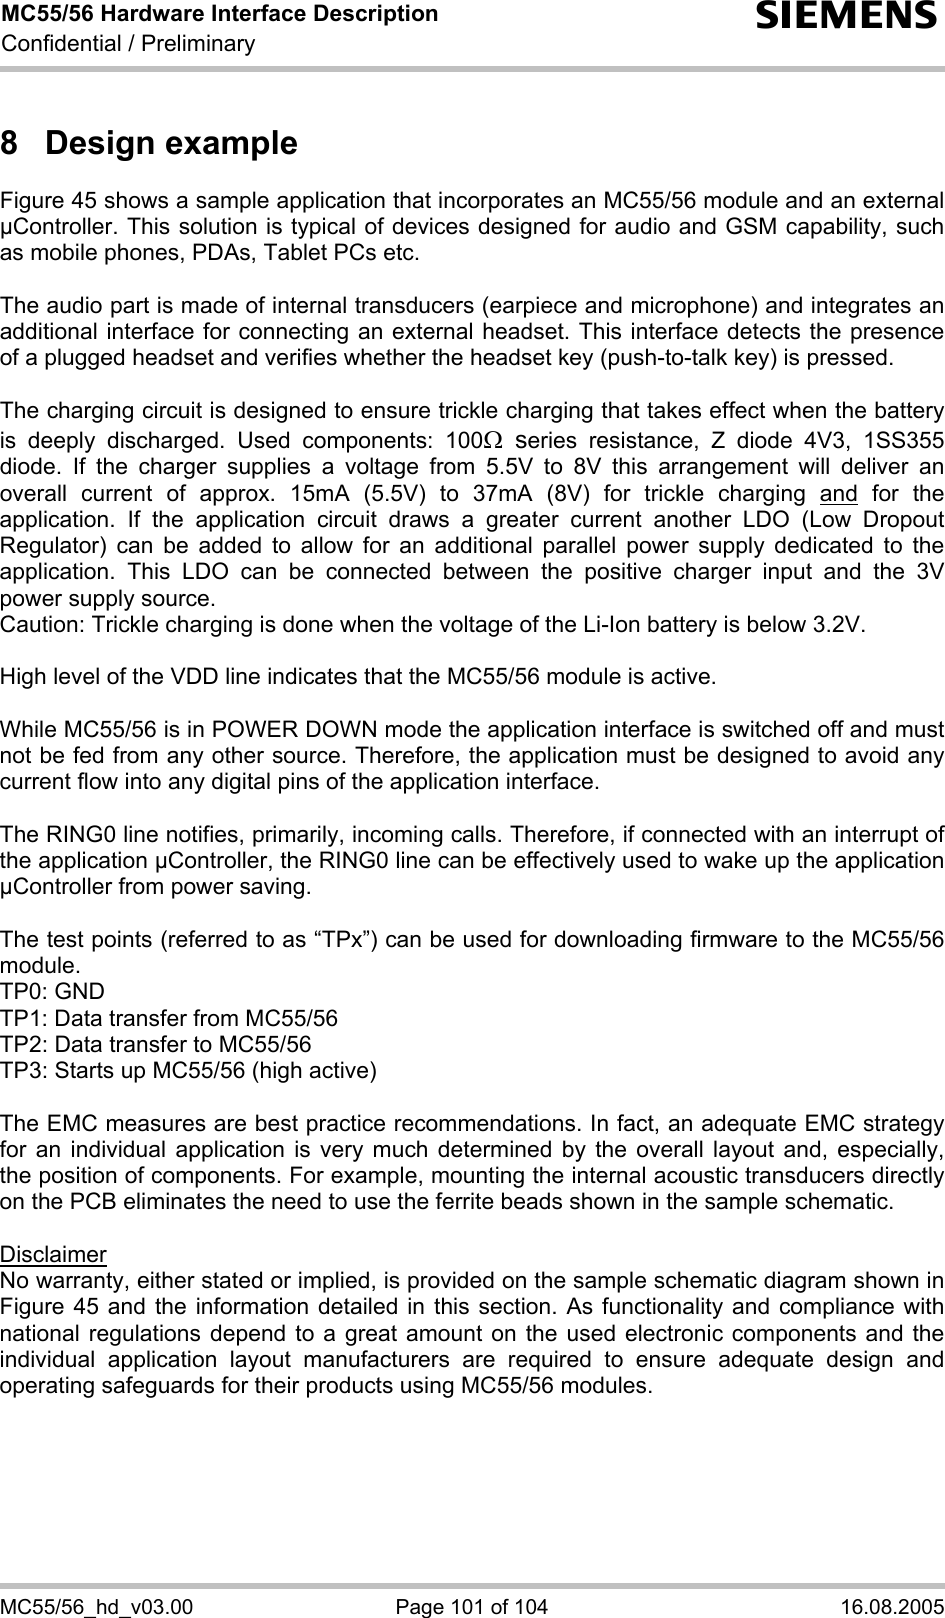 MC55/56 Hardware Interface Description Confidential / Preliminary s MC55/56_hd_v03.00  Page 101 of 104  16.08.2005 8 Design example Figure 45 shows a sample application that incorporates an MC55/56 module and an external µController. This solution is typical of devices designed for audio and GSM capability, such as mobile phones, PDAs, Tablet PCs etc.  The audio part is made of internal transducers (earpiece and microphone) and integrates an additional interface for connecting an external headset. This interface detects the presence of a plugged headset and verifies whether the headset key (push-to-talk key) is pressed.   The charging circuit is designed to ensure trickle charging that takes effect when the battery is deeply discharged. Used components: 100Ω series resistance, Z diode 4V3, 1SS355 diode. If the charger supplies a voltage from 5.5V to 8V this arrangement will deliver an overall current of approx. 15mA (5.5V) to 37mA (8V) for trickle charging and for the application. If the application circuit draws a greater current another LDO (Low Dropout Regulator) can be added to allow for an additional parallel power supply dedicated to the application. This LDO can be connected between the positive charger input and the 3V power supply source. Caution: Trickle charging is done when the voltage of the Li-Ion battery is below 3.2V.  High level of the VDD line indicates that the MC55/56 module is active.   While MC55/56 is in POWER DOWN mode the application interface is switched off and must not be fed from any other source. Therefore, the application must be designed to avoid any current flow into any digital pins of the application interface.   The RING0 line notifies, primarily, incoming calls. Therefore, if connected with an interrupt of the application µController, the RING0 line can be effectively used to wake up the application µController from power saving.  The test points (referred to as “TPx”) can be used for downloading firmware to the MC55/56 module. TP0: GND TP1: Data transfer from MC55/56 TP2: Data transfer to MC55/56 TP3: Starts up MC55/56 (high active)  The EMC measures are best practice recommendations. In fact, an adequate EMC strategy for an individual application is very much determined by the overall layout and, especially, the position of components. For example, mounting the internal acoustic transducers directly on the PCB eliminates the need to use the ferrite beads shown in the sample schematic.  Disclaimer No warranty, either stated or implied, is provided on the sample schematic diagram shown in Figure 45 and the information detailed in this section. As functionality and compliance with national regulations depend to a great amount on the used electronic components and the individual application layout manufacturers are required to ensure adequate design and operating safeguards for their products using MC55/56 modules.      